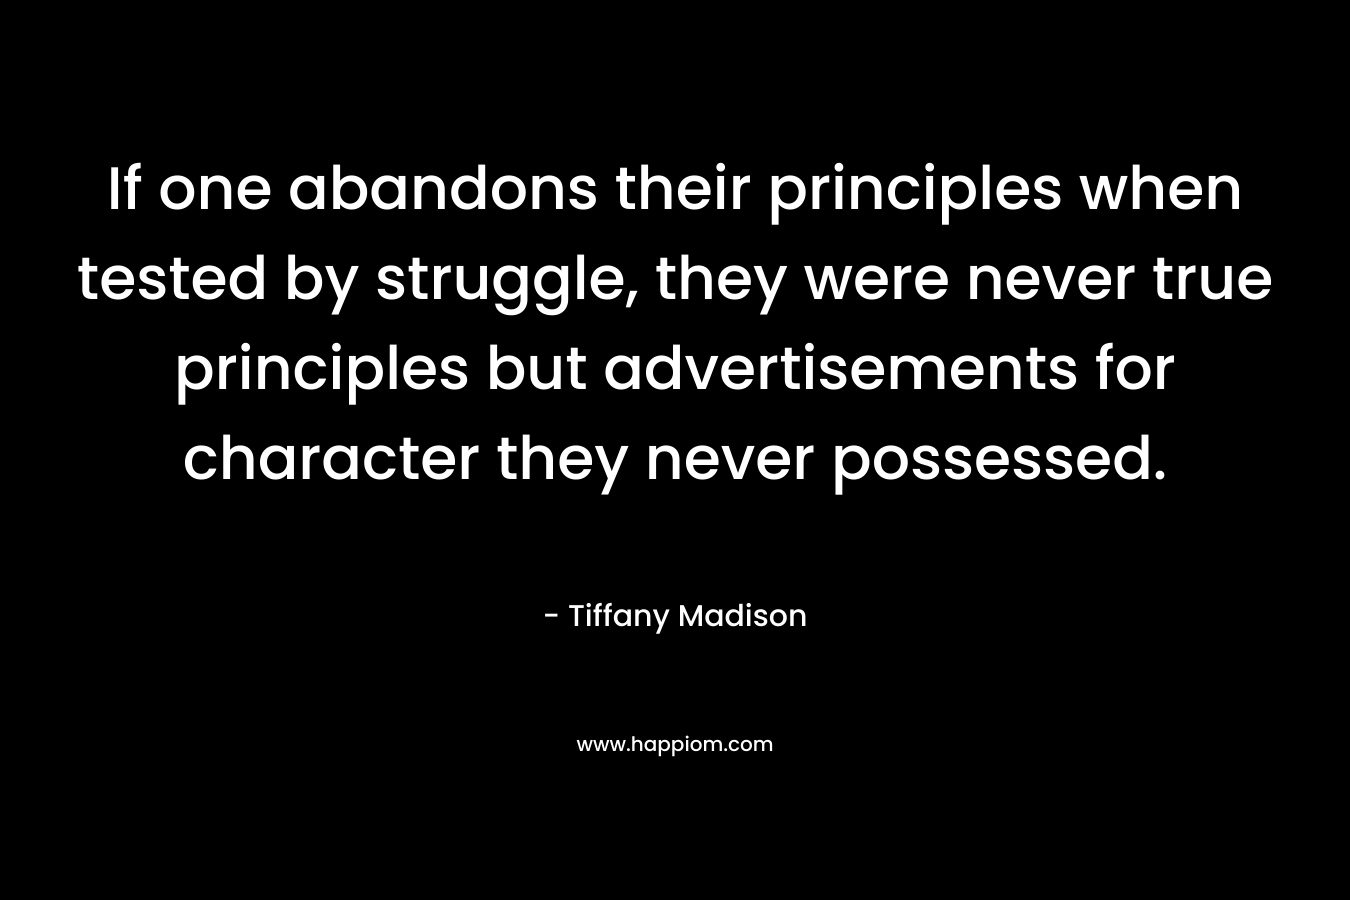 If one abandons their principles when tested by struggle, they were never true principles but advertisements for character they never possessed. – Tiffany Madison